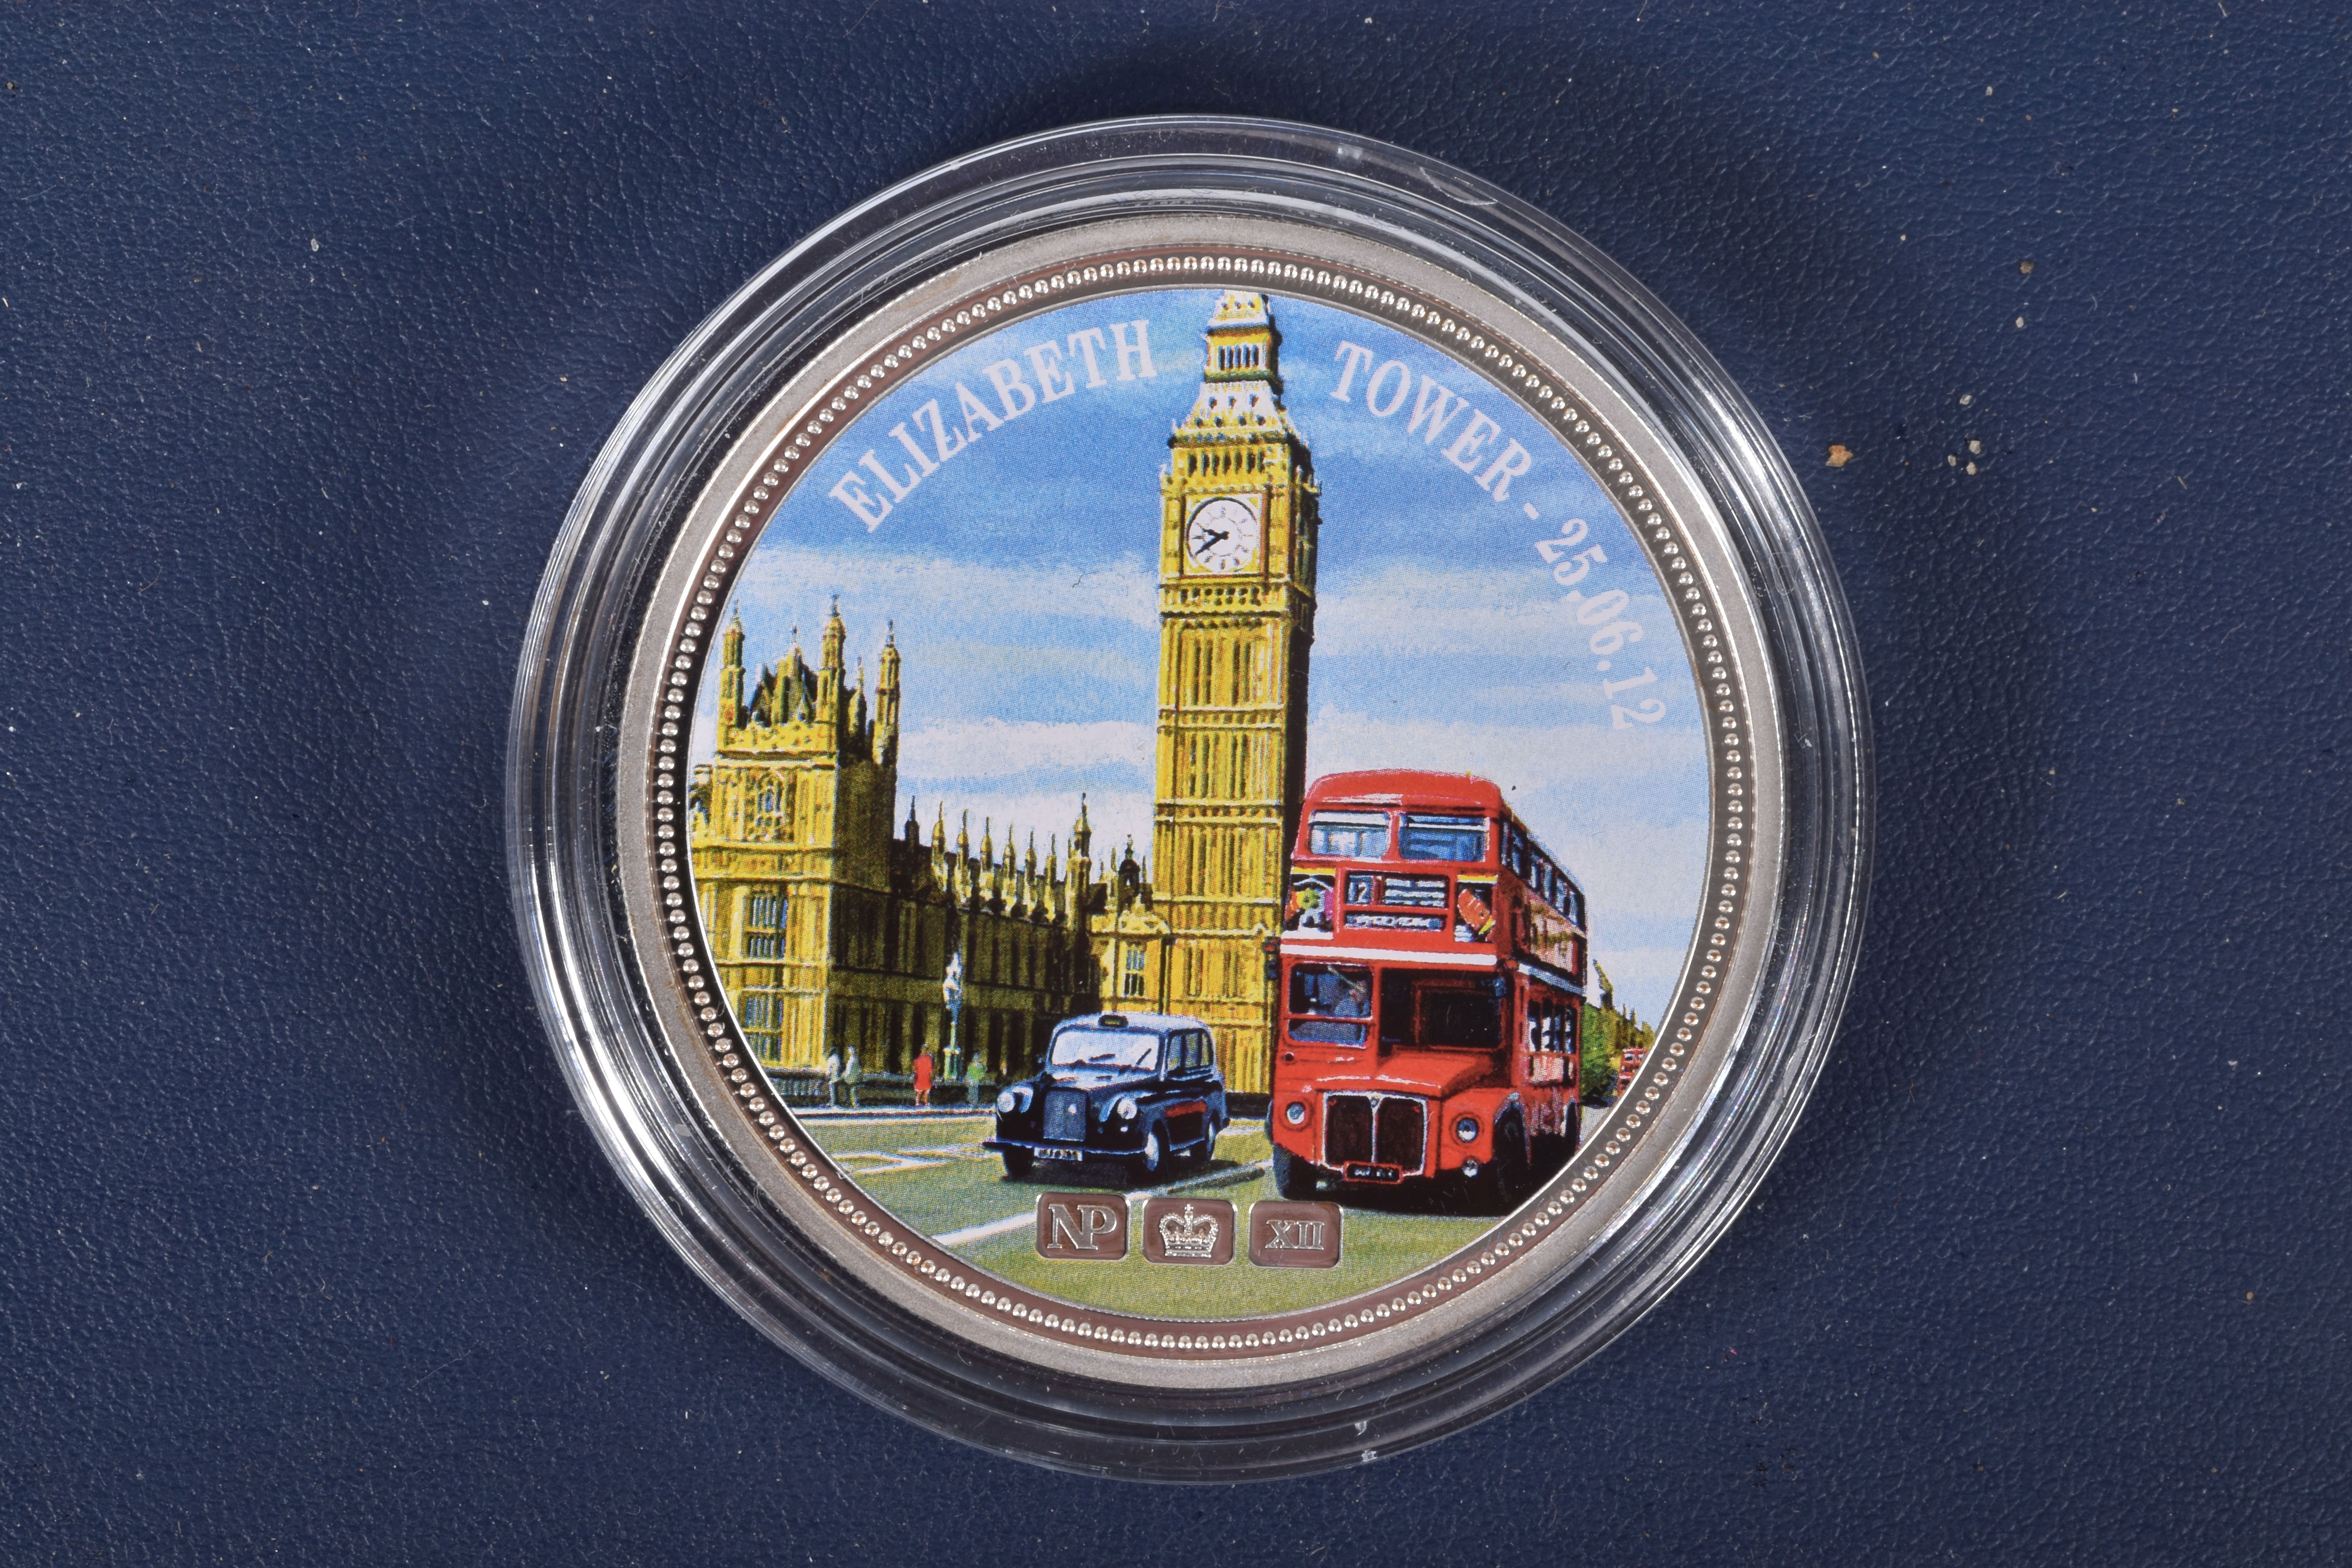 A 2012 SILVER PROOF .925 RENAMED THE ELIZABETH TOWER (Big Ben Clock Tower) 2oz Numisproof box and - Image 7 of 9